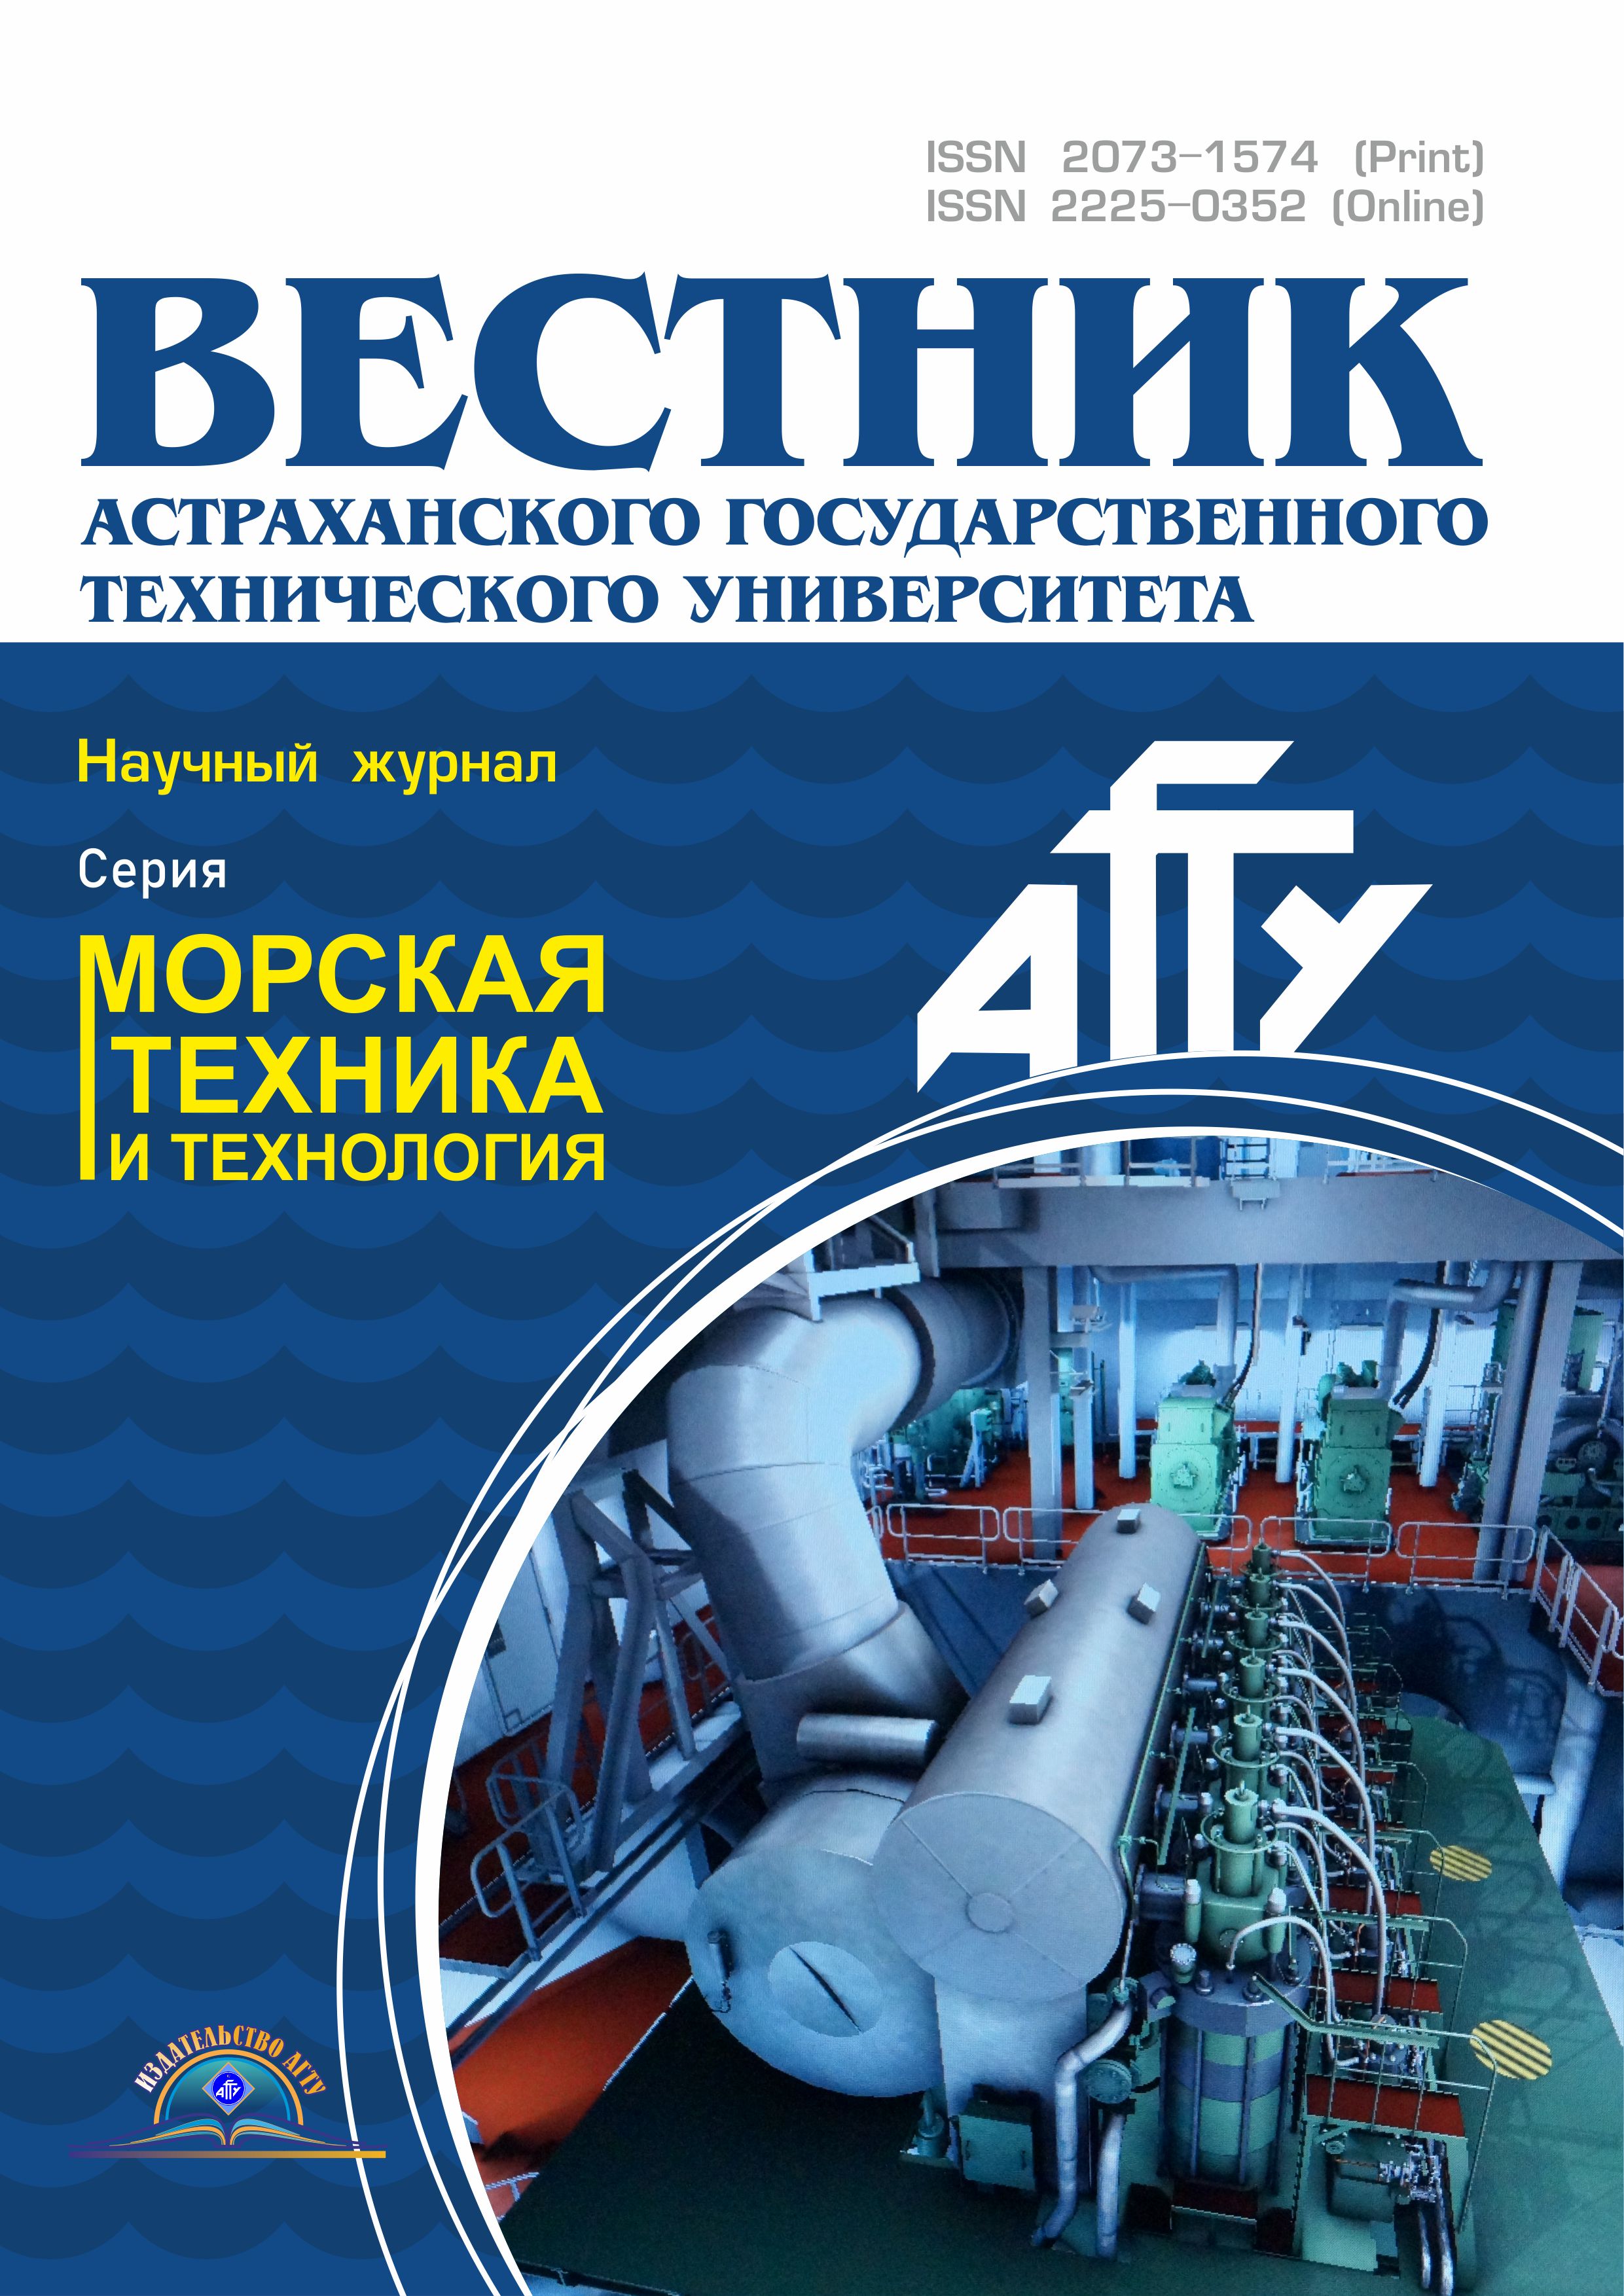                         METHOD OF IMPROVEMENT OF ENERGY EFFICIENCY OF HEAT RADIATOR OF THE CLOSED COOLING SYSTEM IN THE UNCERTAIN CONDITIONS OF THE SHIP OPERATION
            